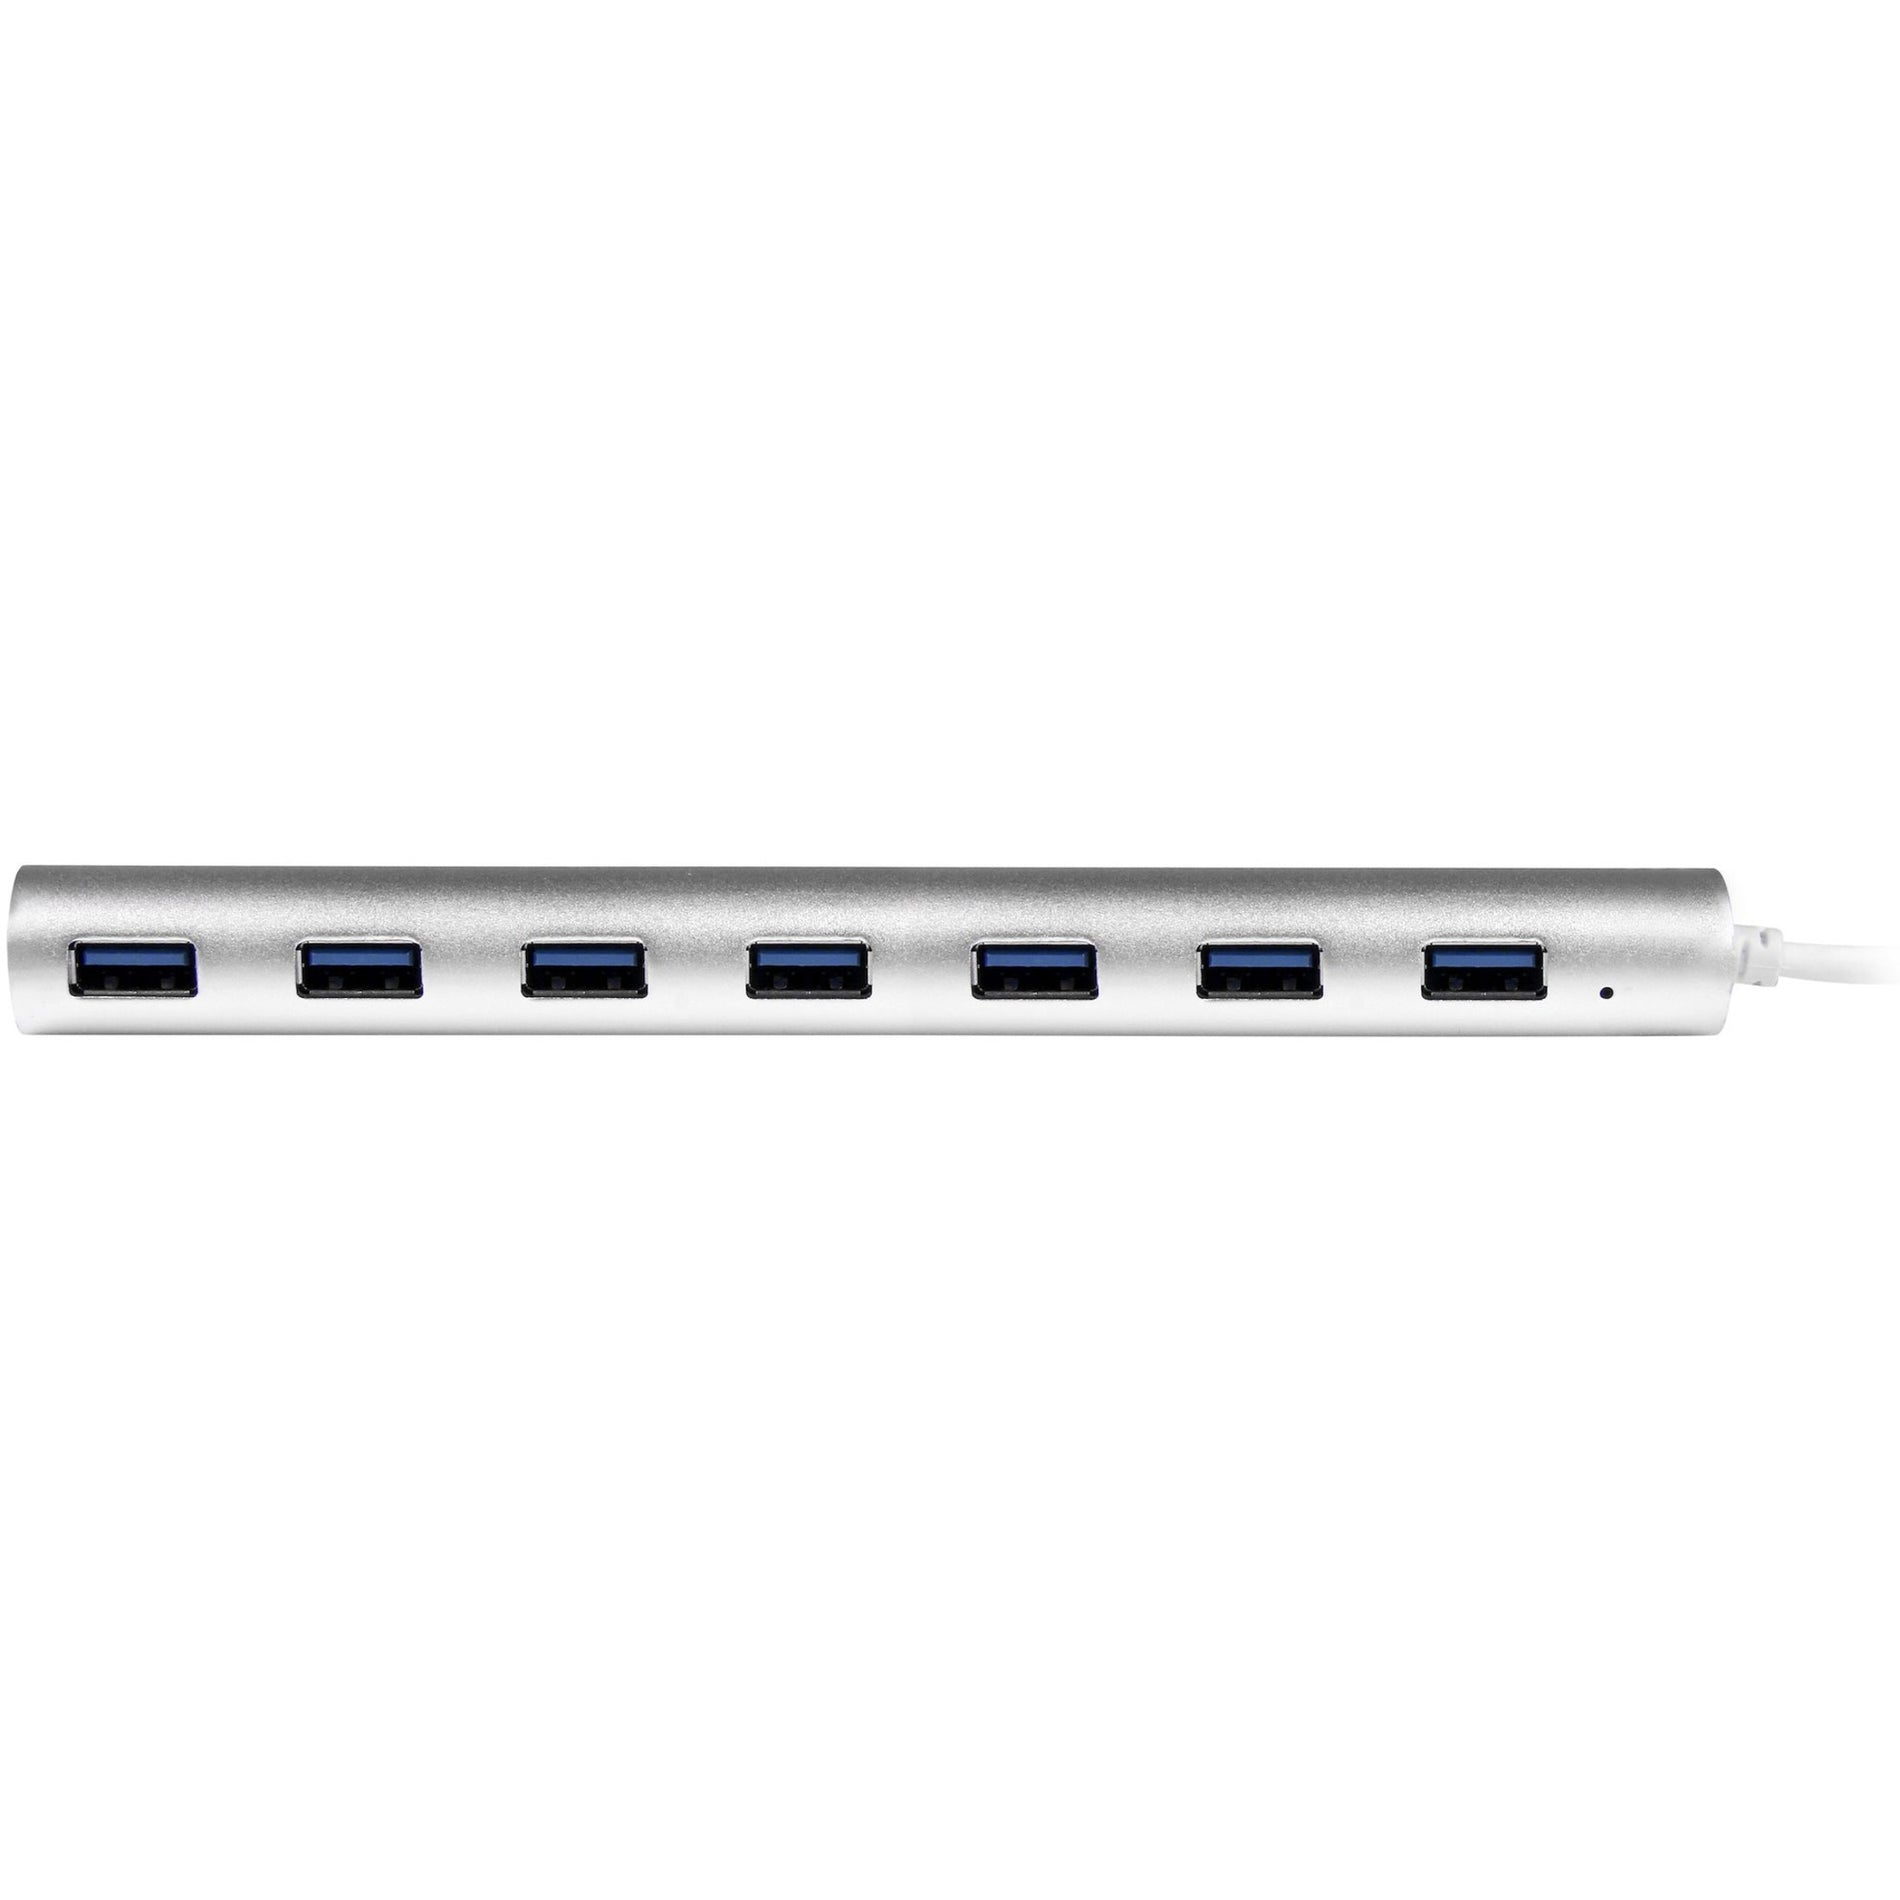 StarTech.com ST73007UA 7 Port Compact USB 3.0 Hub with Built-in Cable - Aluminum USB Hub - Silver, High-Speed Data Transfer and Easy Connectivity